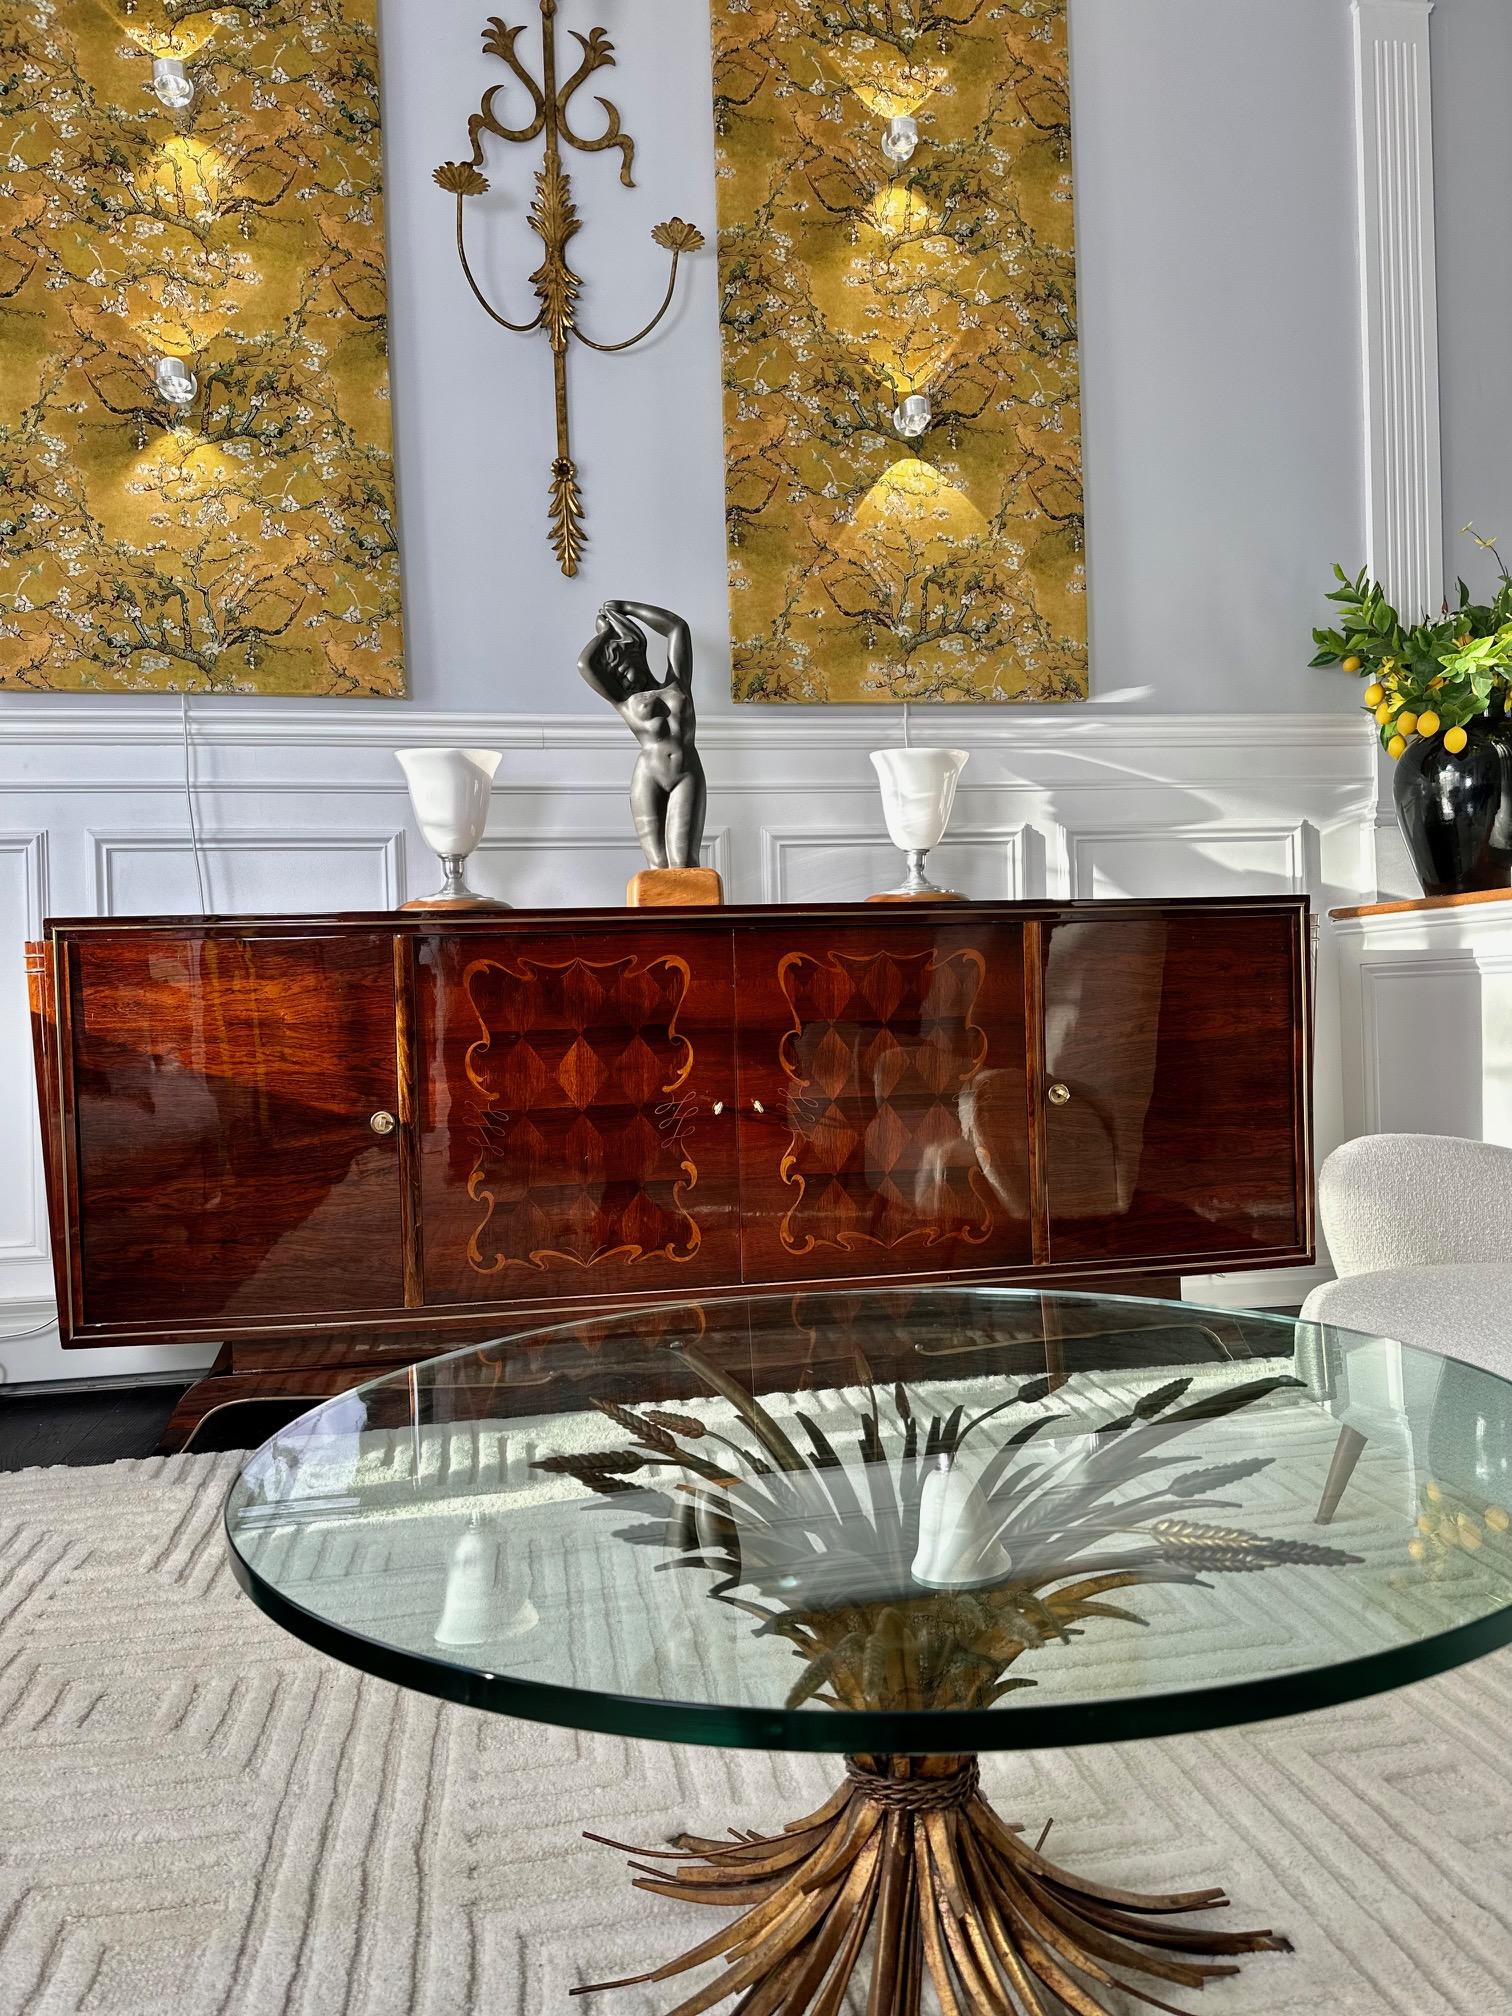 This is a beautiful Art Deco sideboard or credenza made from solid oak and Macassar ebony veneer. The buffet's drawers, inside doors and shelves is made of Sycamore wood. It features elegant bronze elements attributed to Jules Leleu, renowned French